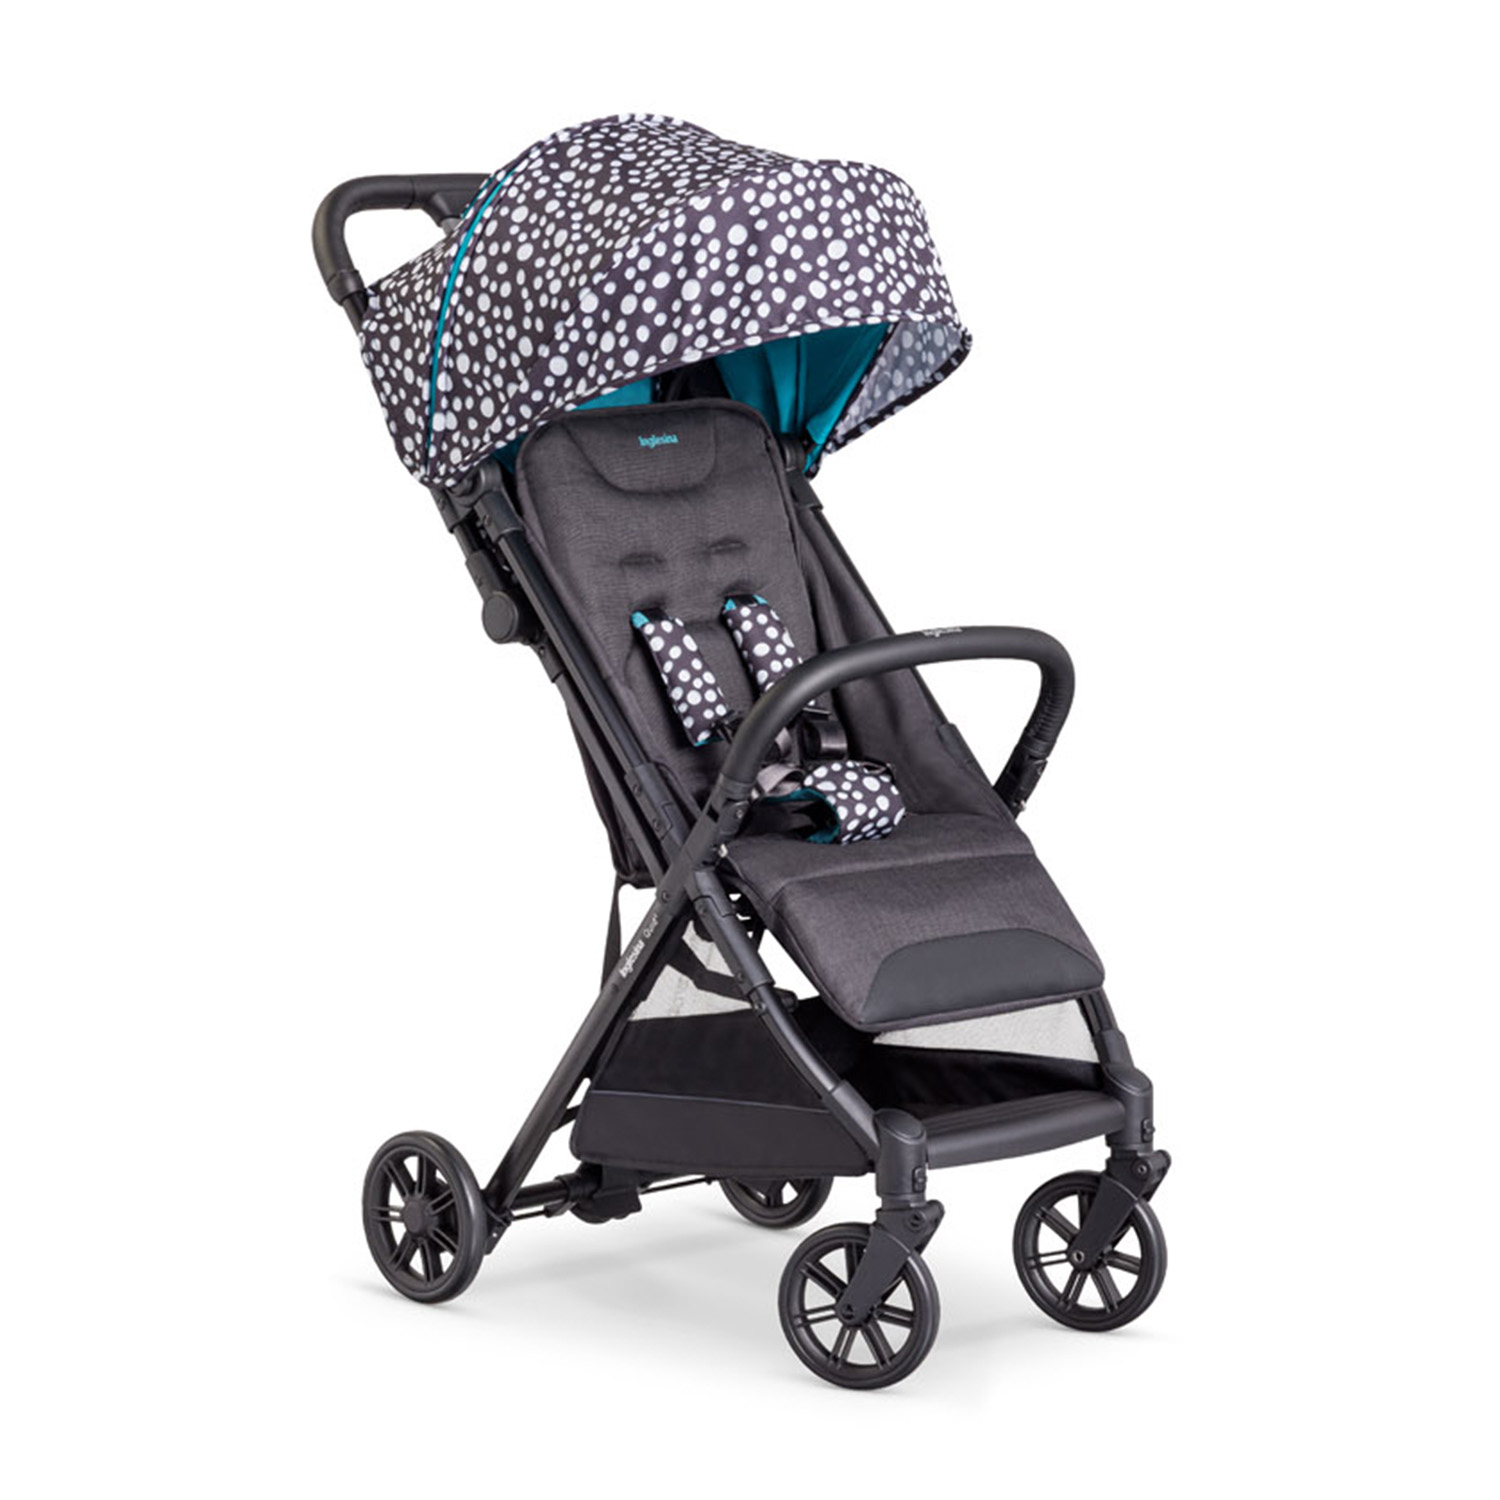 Travel with Kids: Check out the @Inglesina USA QUID 2 Stroller! The pe